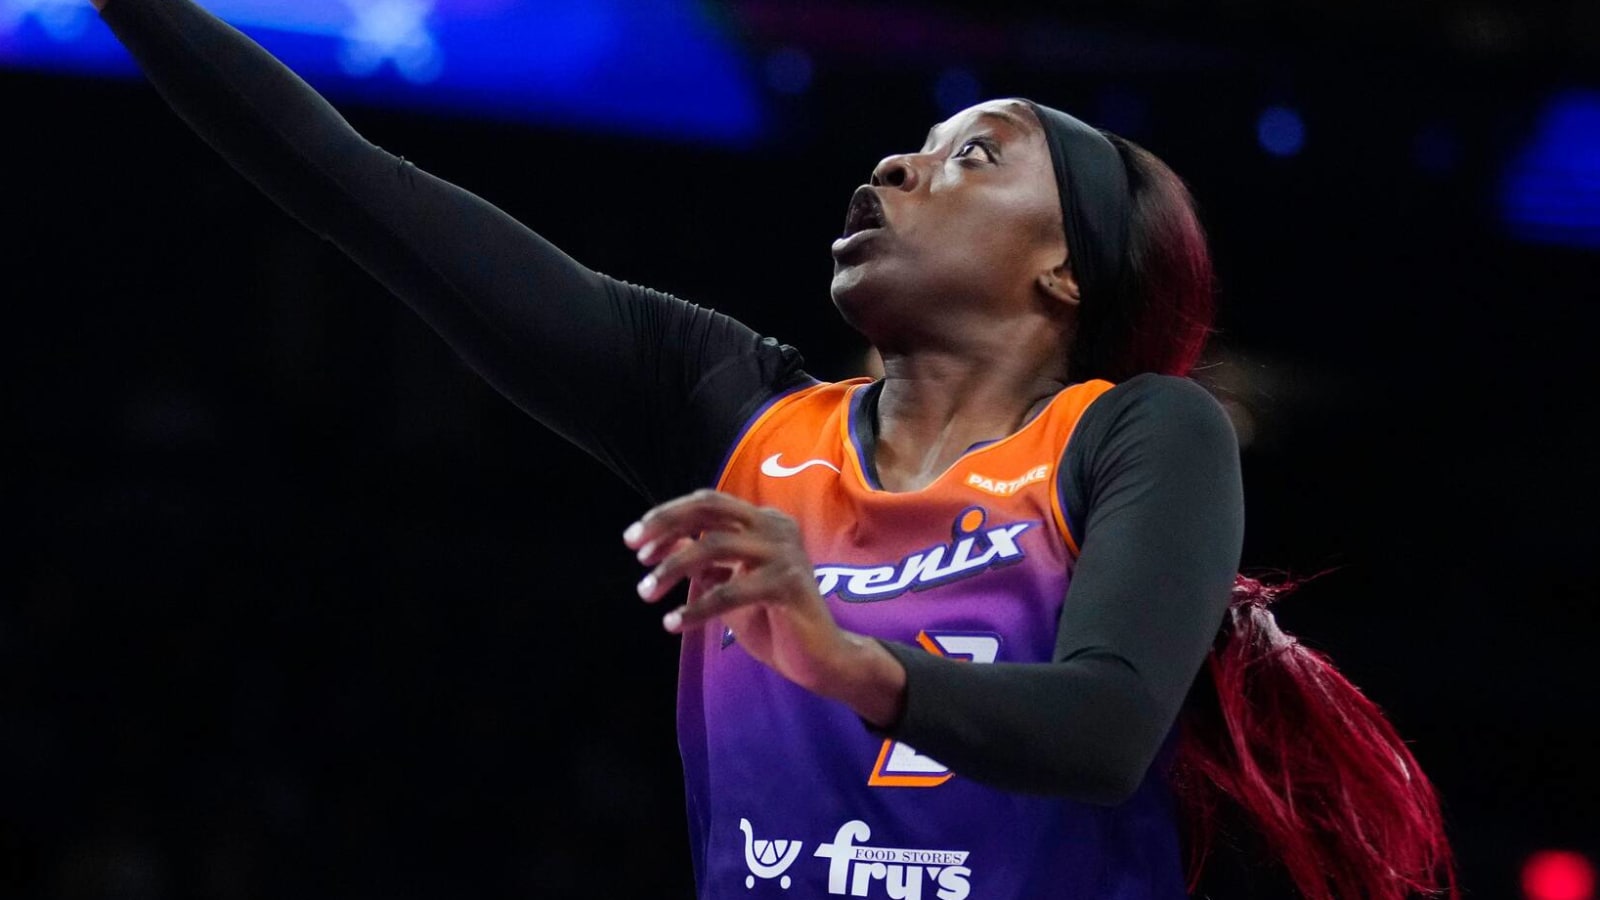 Watch: Kahleah Copper, Natasha Cloud Relive Mercury’s First Win of the Season, Copper scoring 38 points